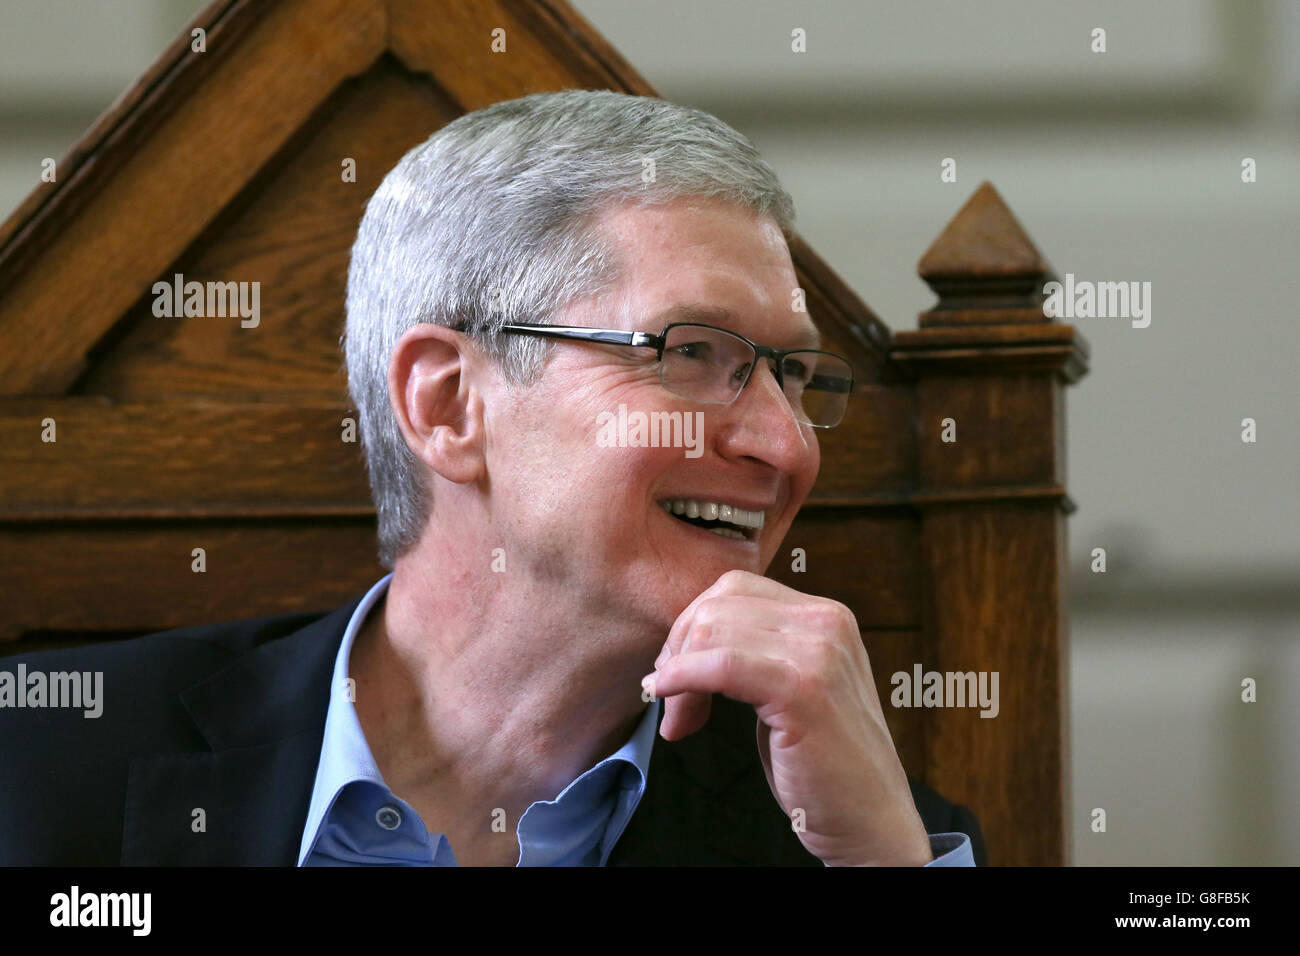 Apple chief executive Tim Cook at Trinity College in Dublin where he was presented with the Gold Medal of Honorary Patronage from Trinity's philosophical society. Stock Photo